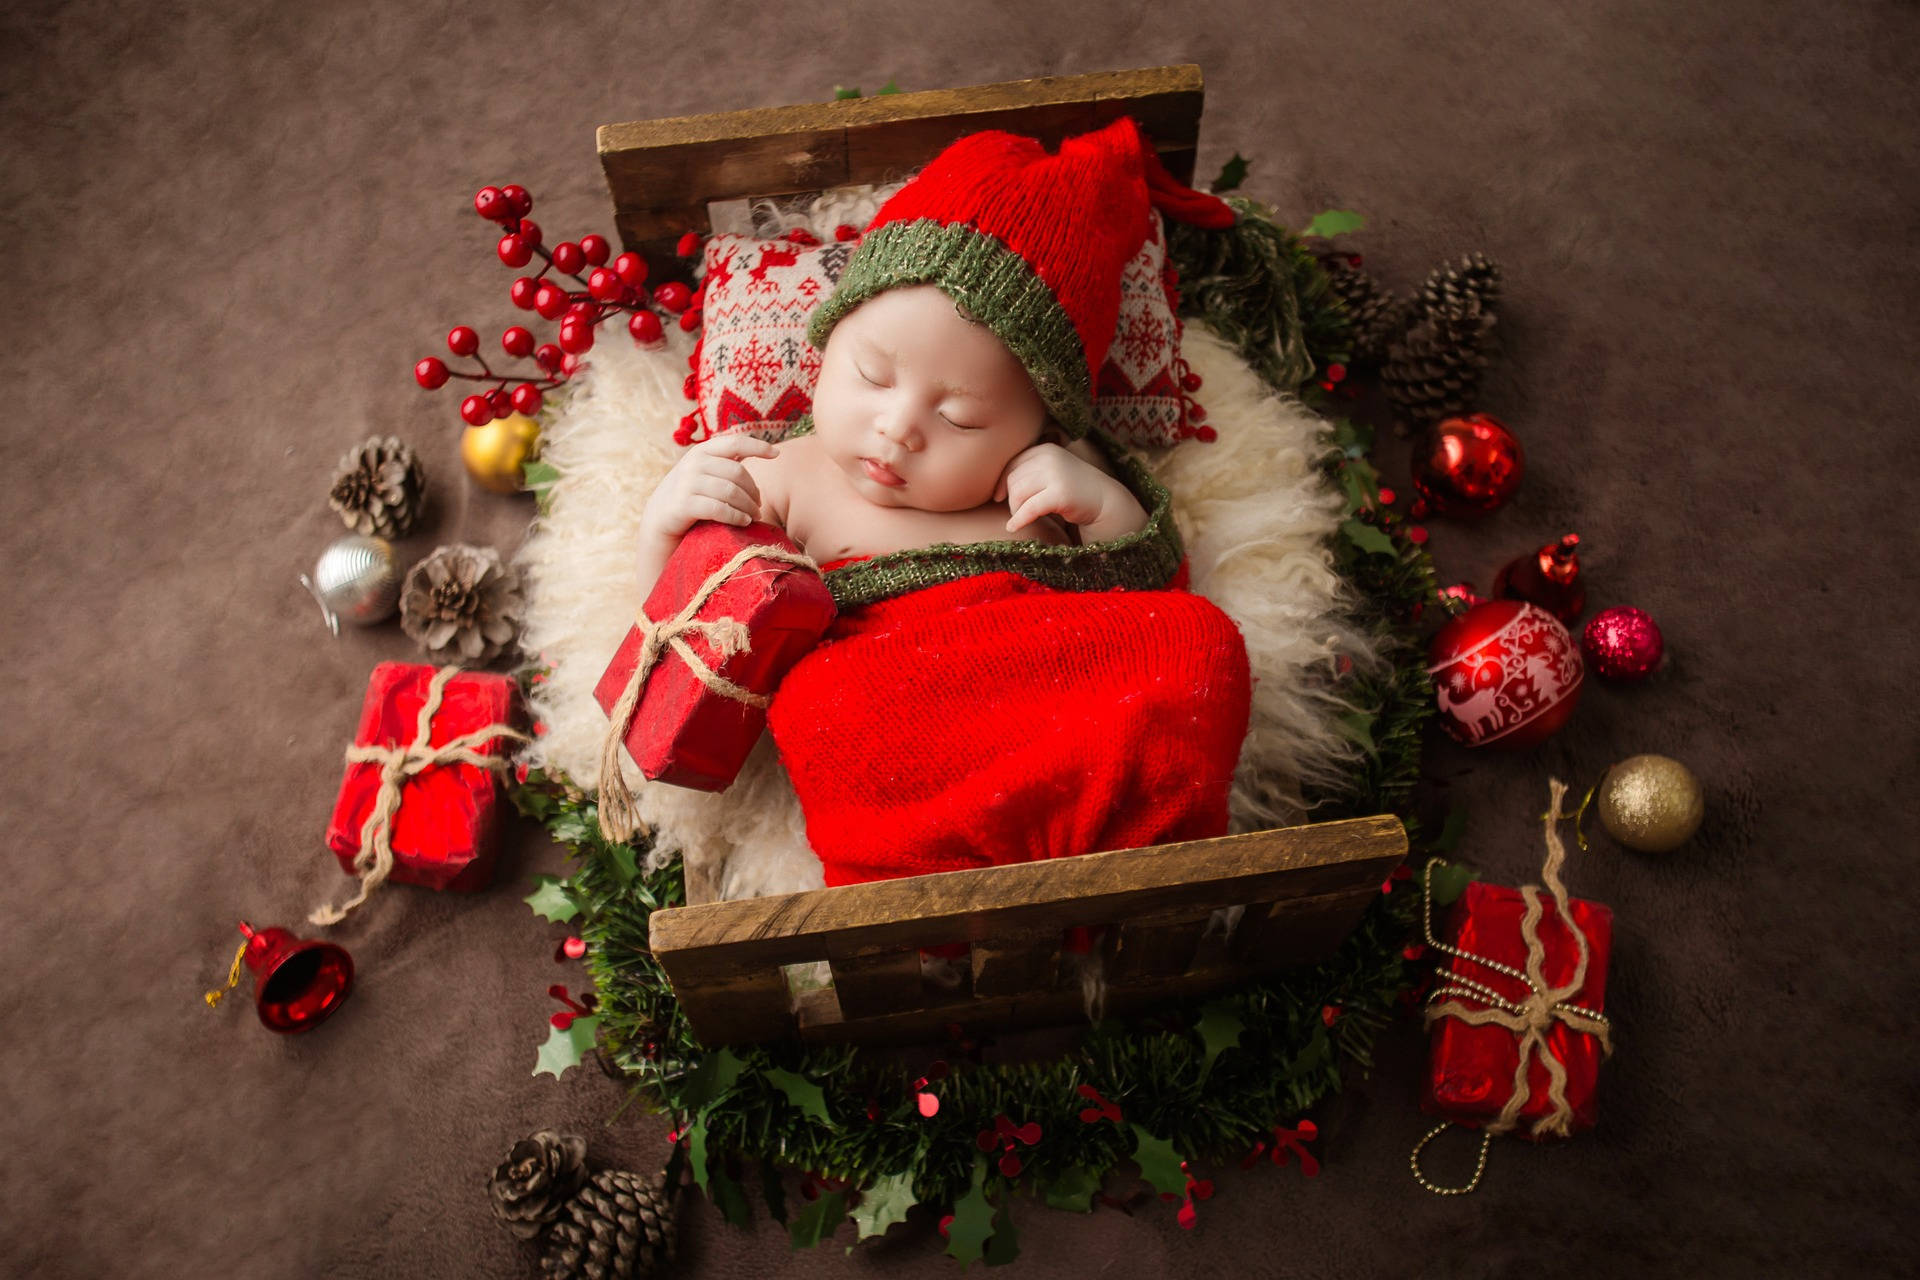 Download Very Cute Baby In Christmas Outfit Wallpaper 